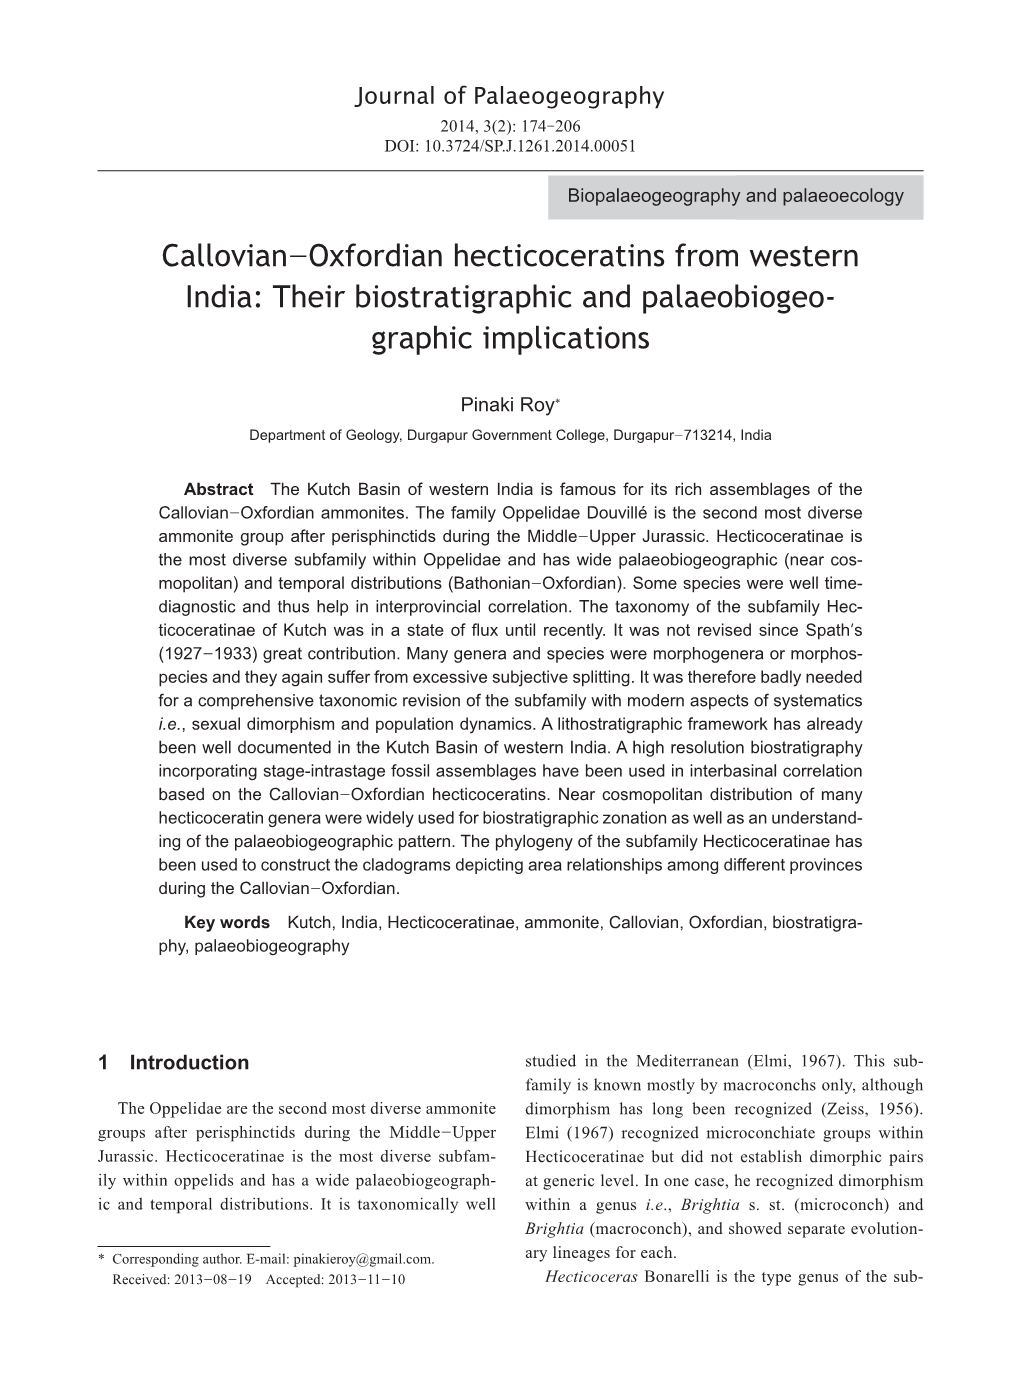 Callovian–Oxfordian Hecticoceratins from Western India